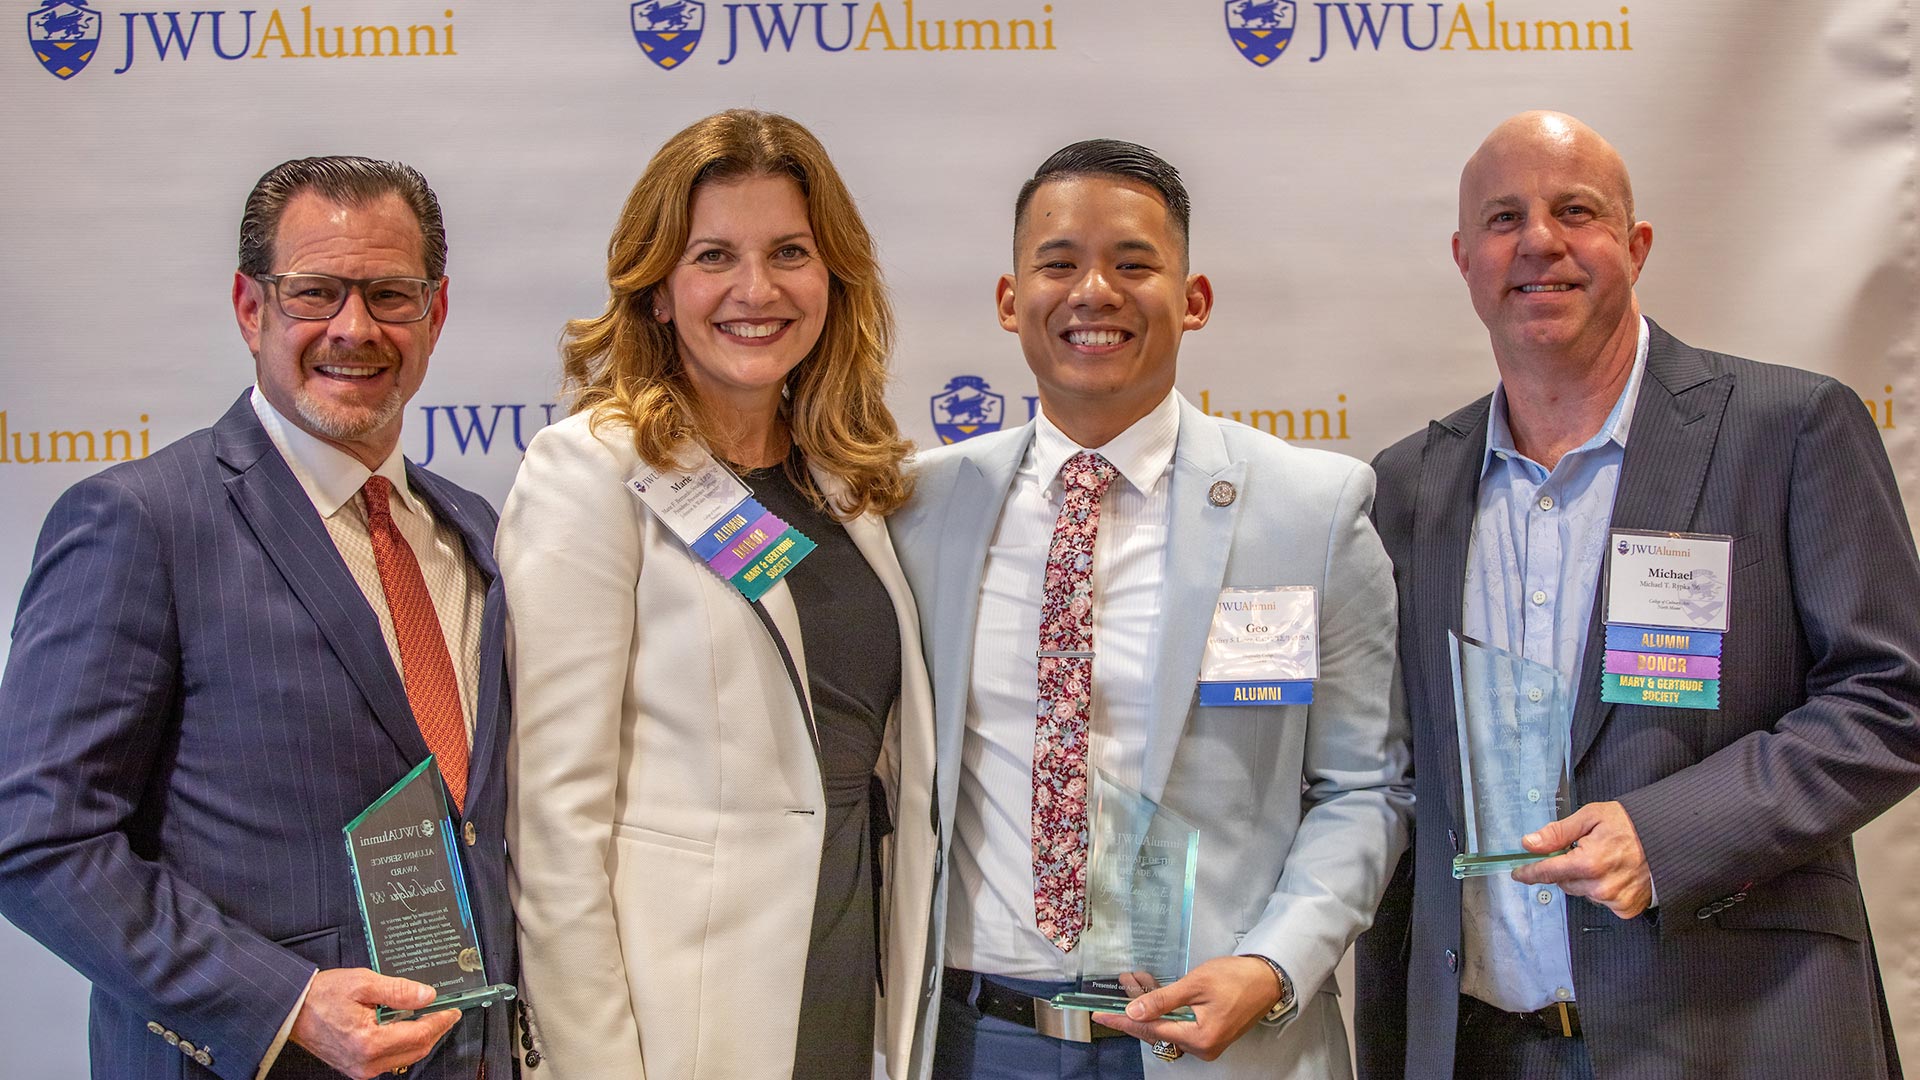 David Salcfas '88, Geoffrey Lanez, CEC '12, '14 MBA and Michael Rypka '96 pictured with Providence Campus President Marie Bernardo-Sousa, LP.D. ’92